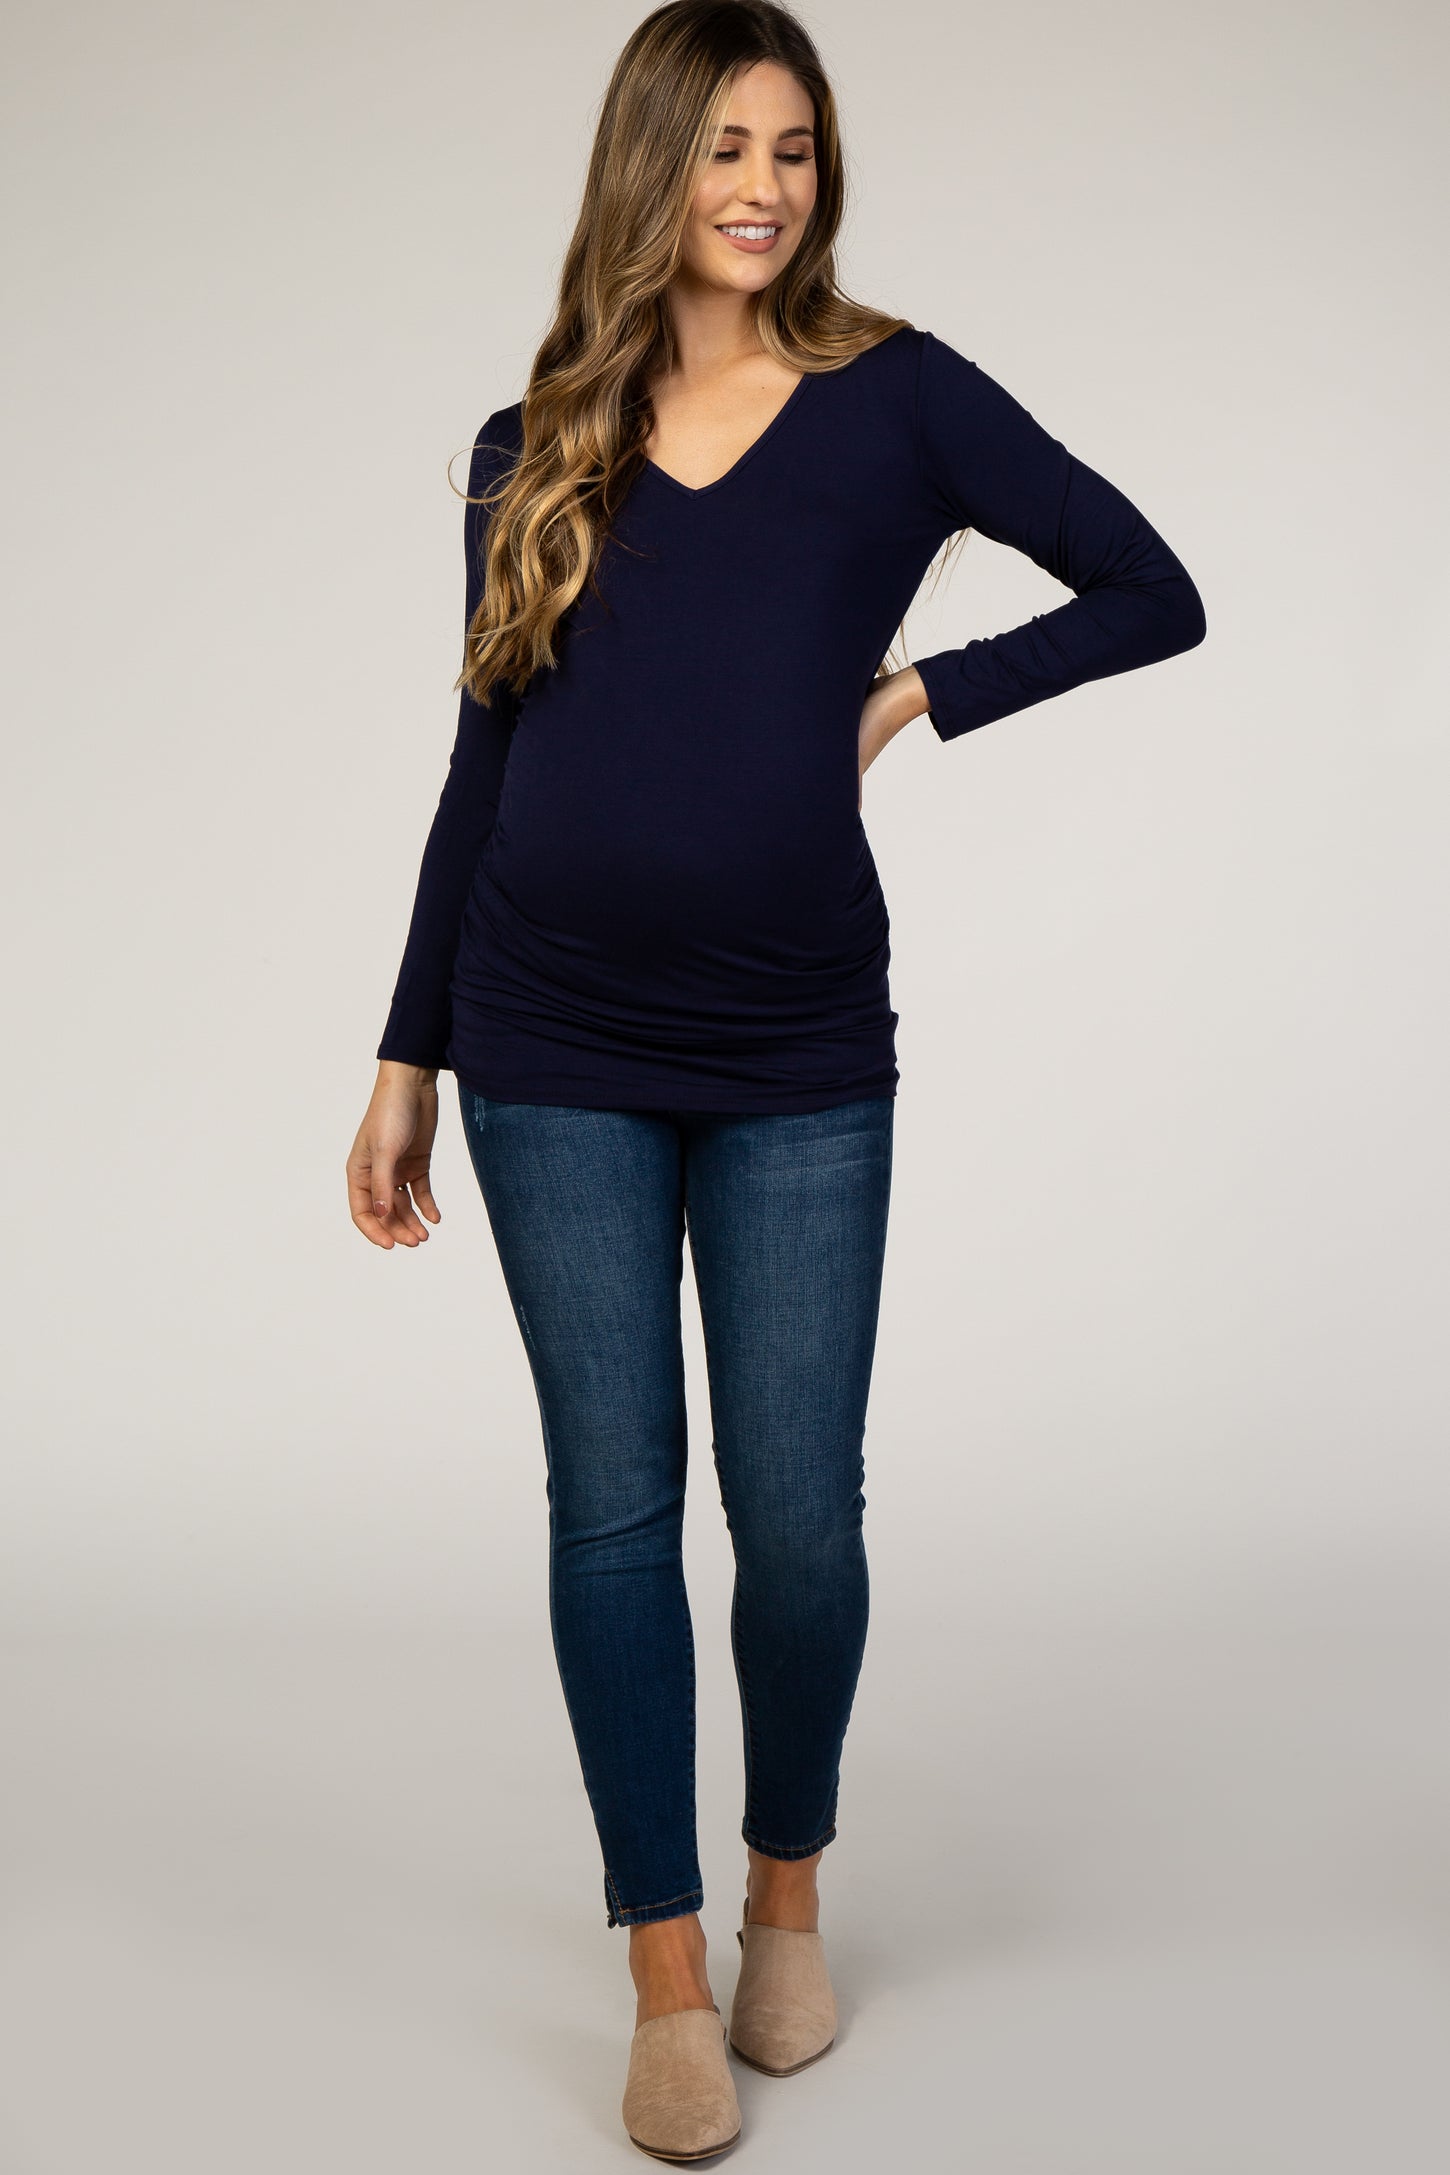 Navy Long Sleeve Ruched Fitted Maternity Top